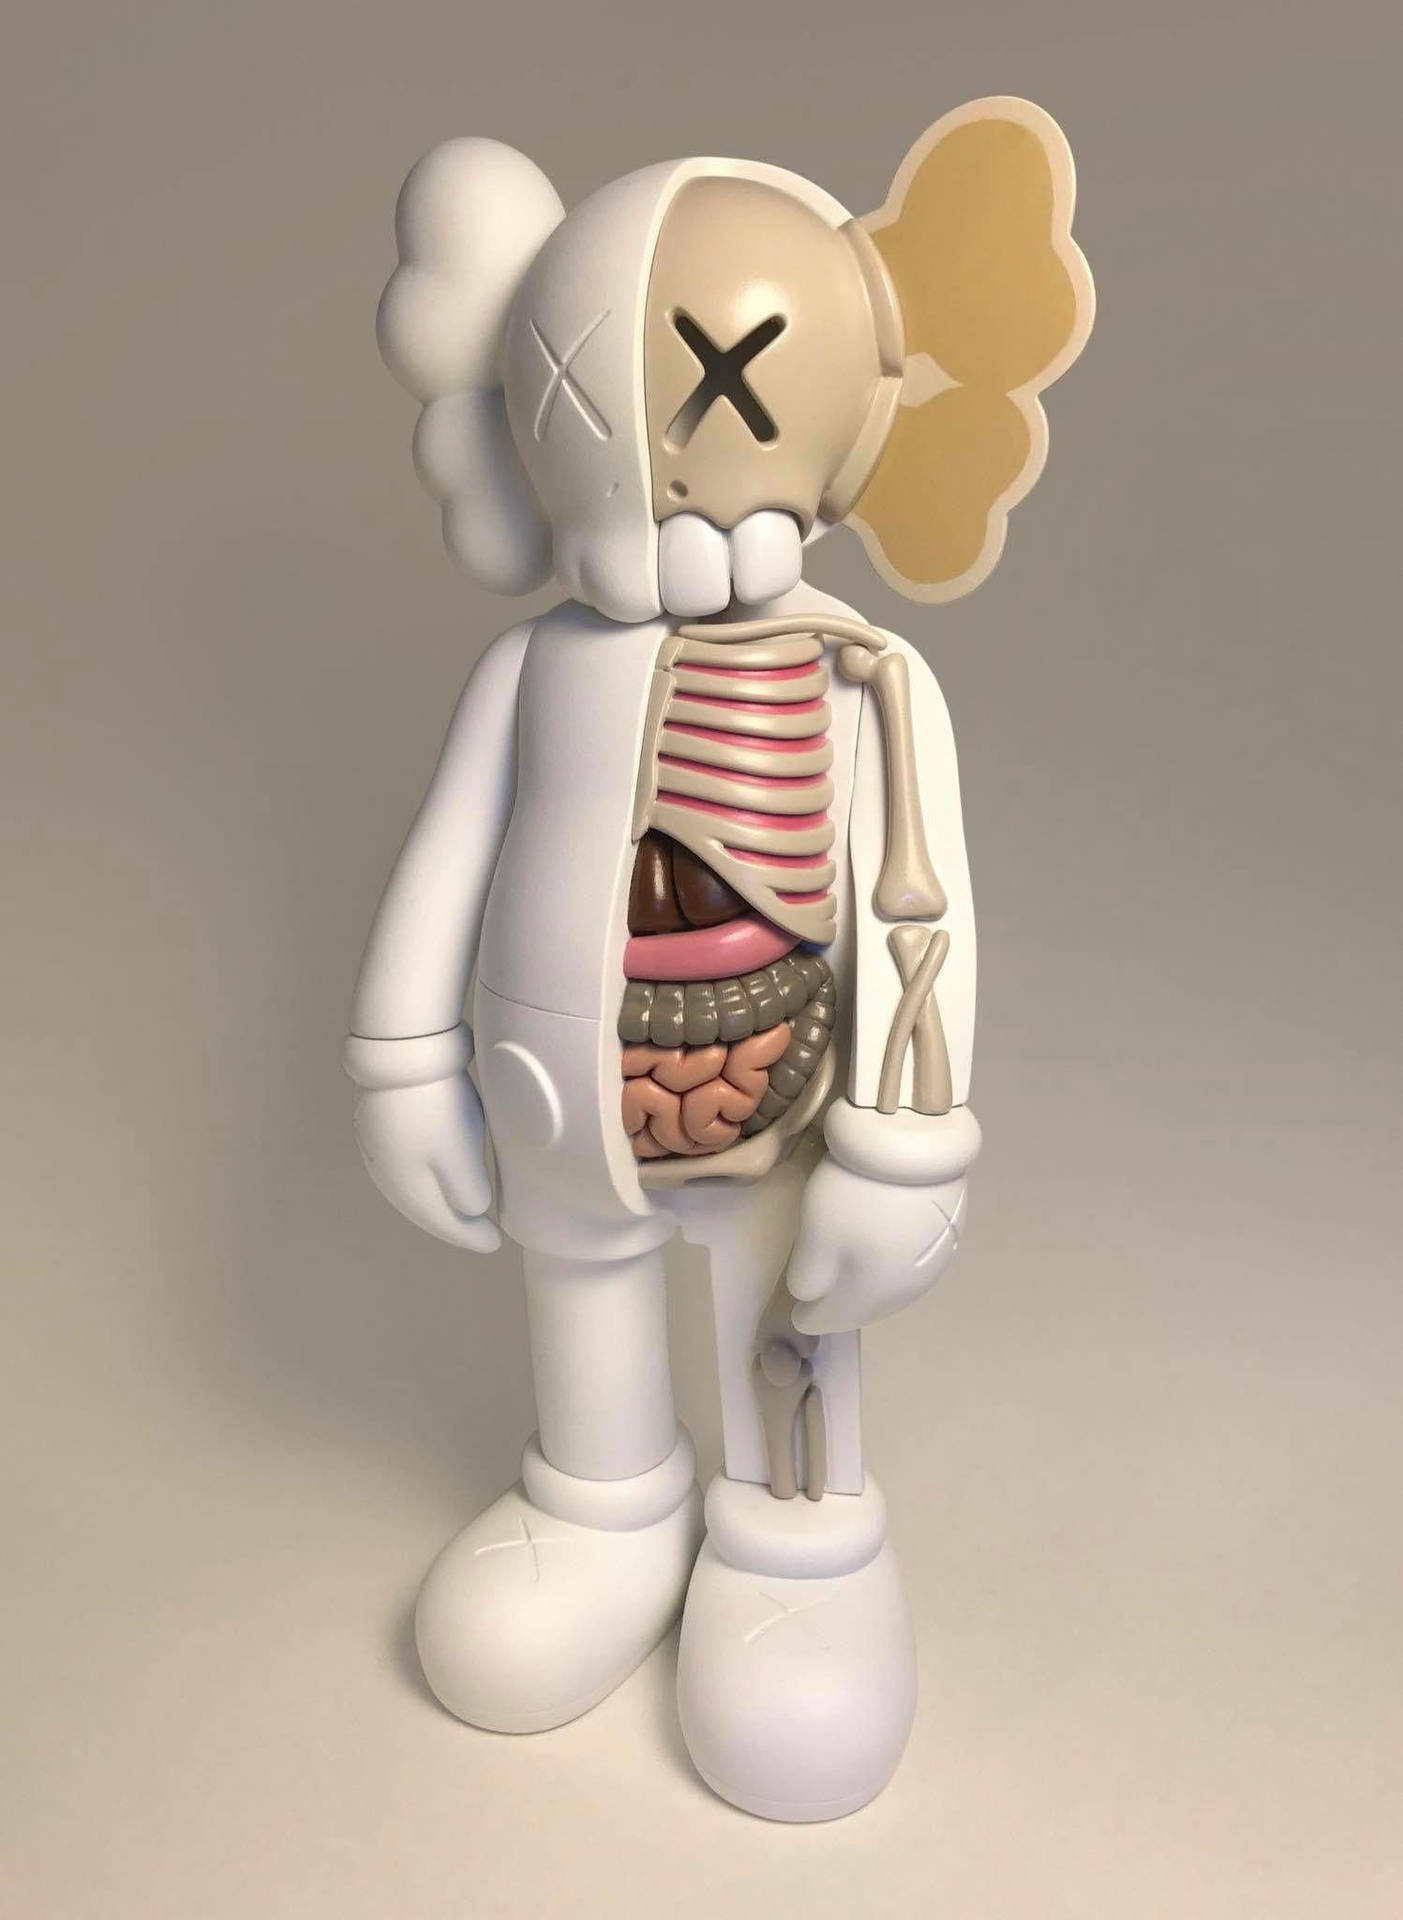 Kaws 1497X2048 Wallpaper and Background Image